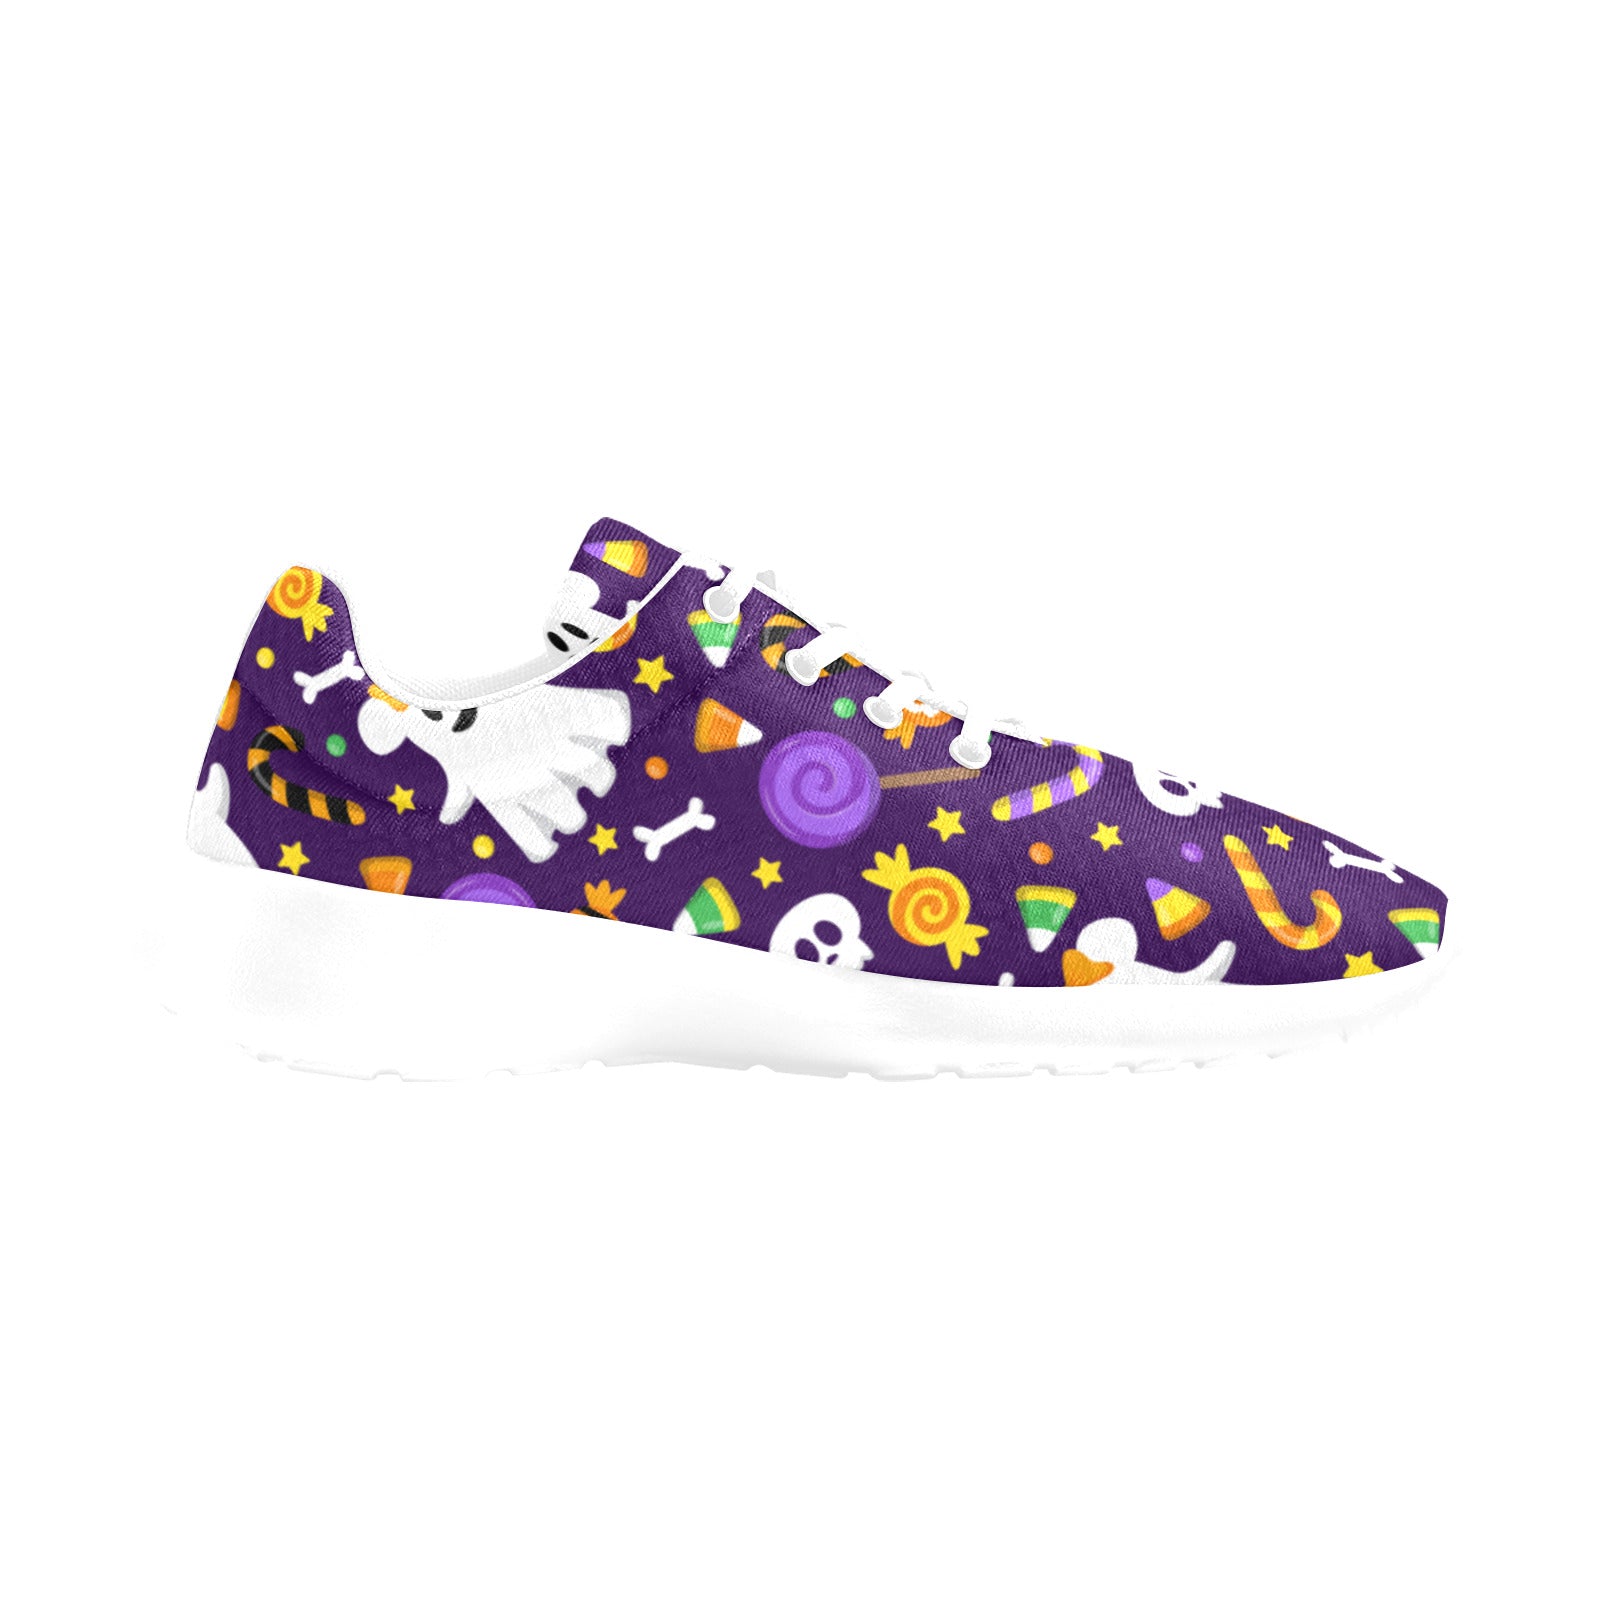 Spooky Mice Women's Athletic Shoes - Ambrie